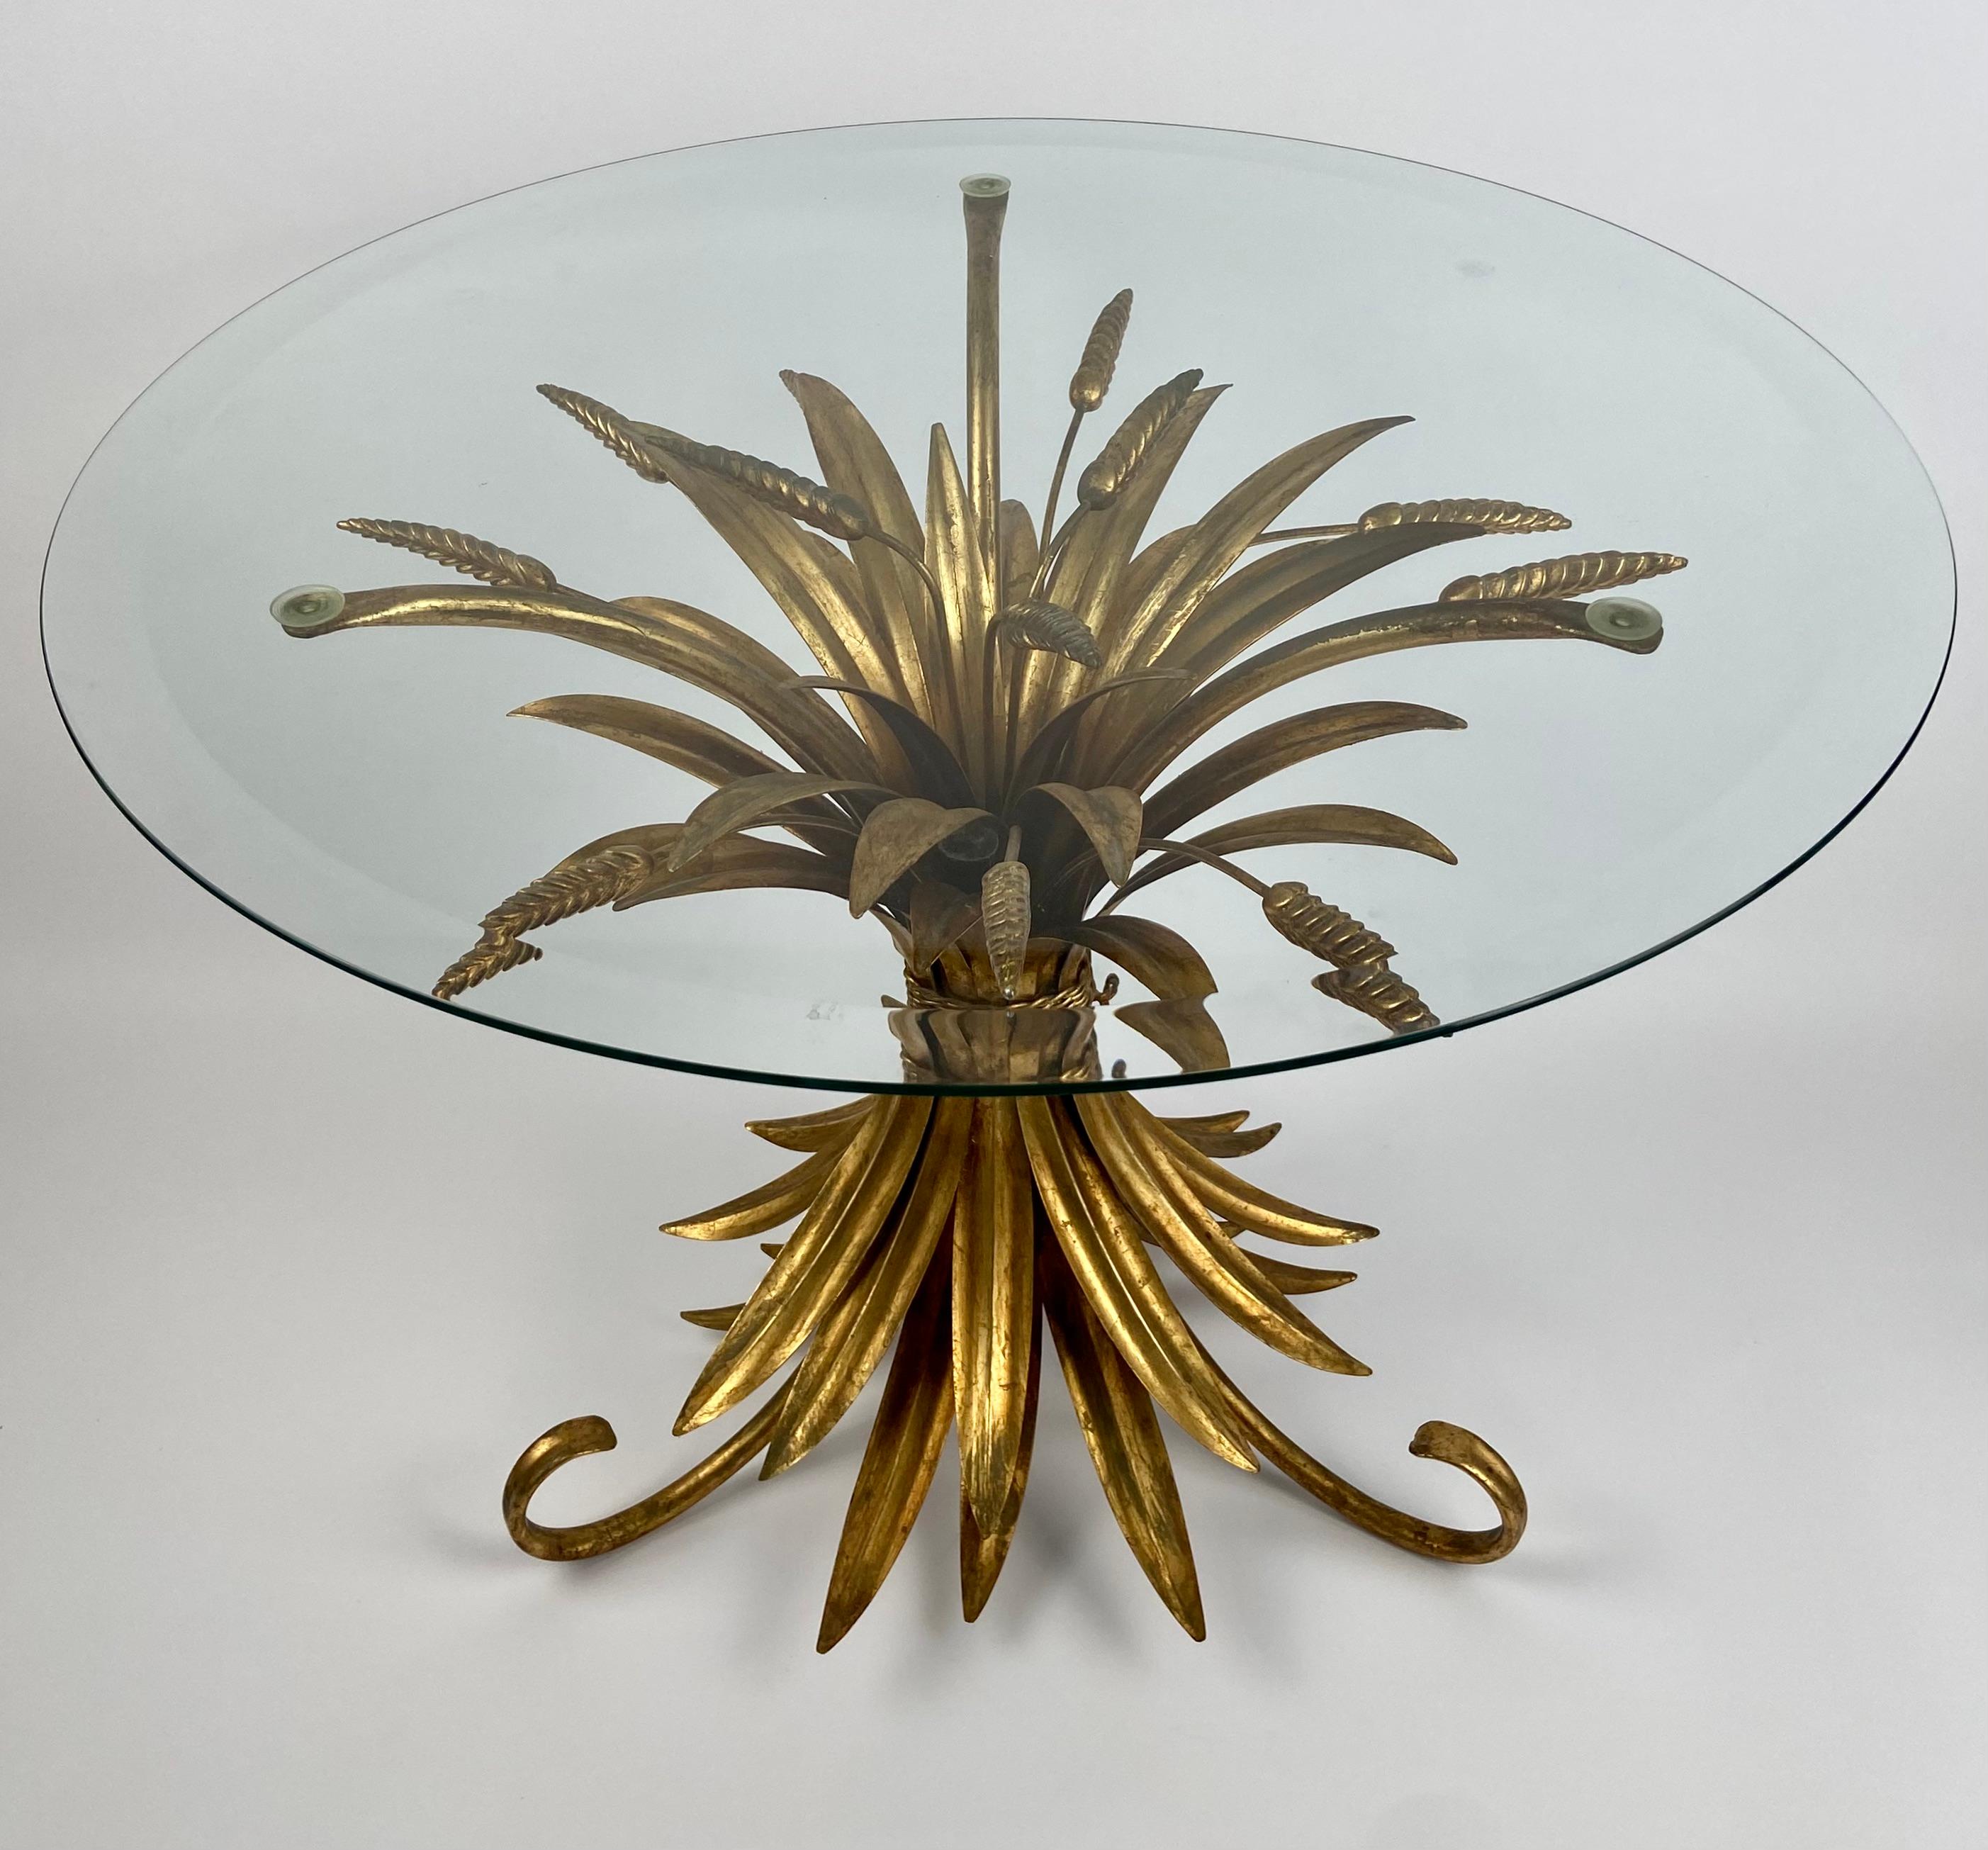 Coco Chanel coffee table, France, gold-plated, 1970s.
It has a faceted glass top.
H: 54cm. W: 45cm. 